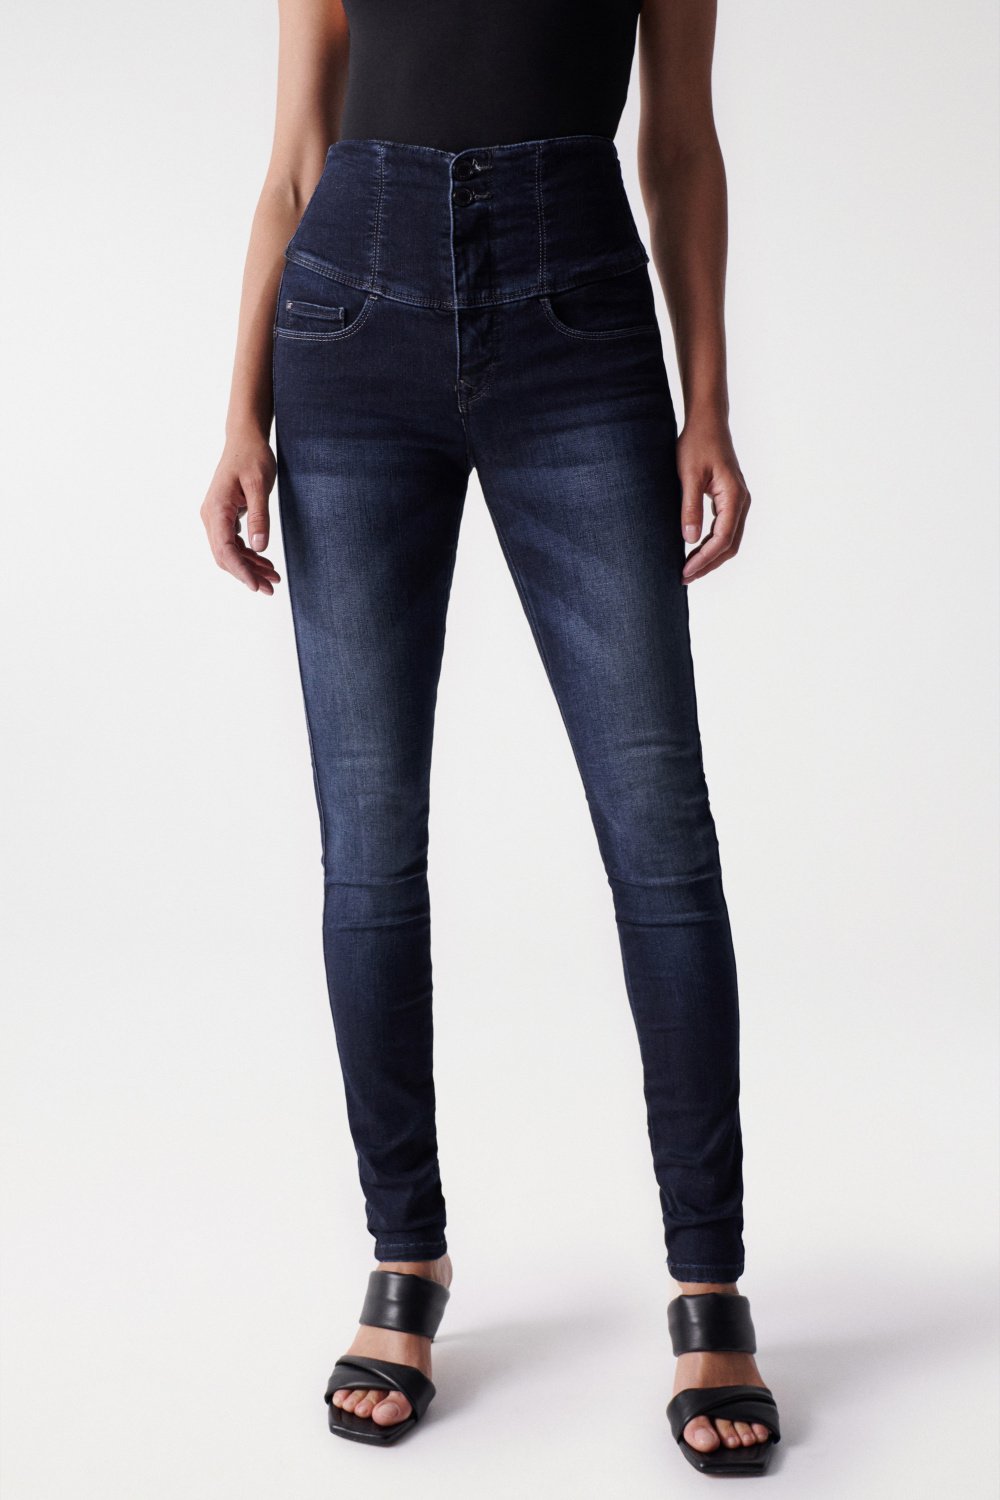 Diva skinny slimming soft touch jeans - Salsa